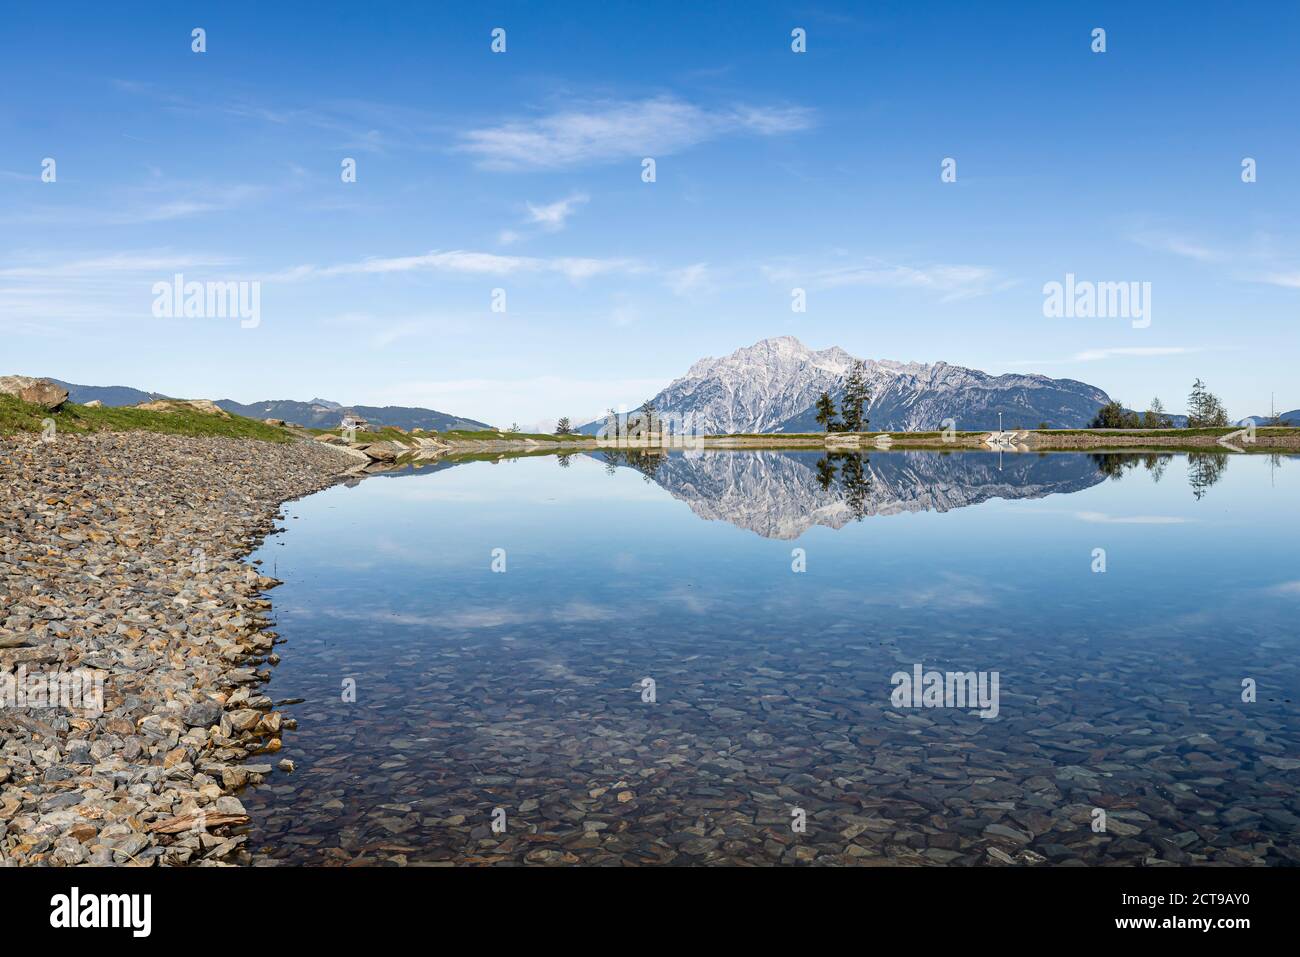 Prinzensee lake in Austria in the region of Hochkoenig Salzburg. The mountains in the background reflect in the mirro surface of the lake. Stock Photo